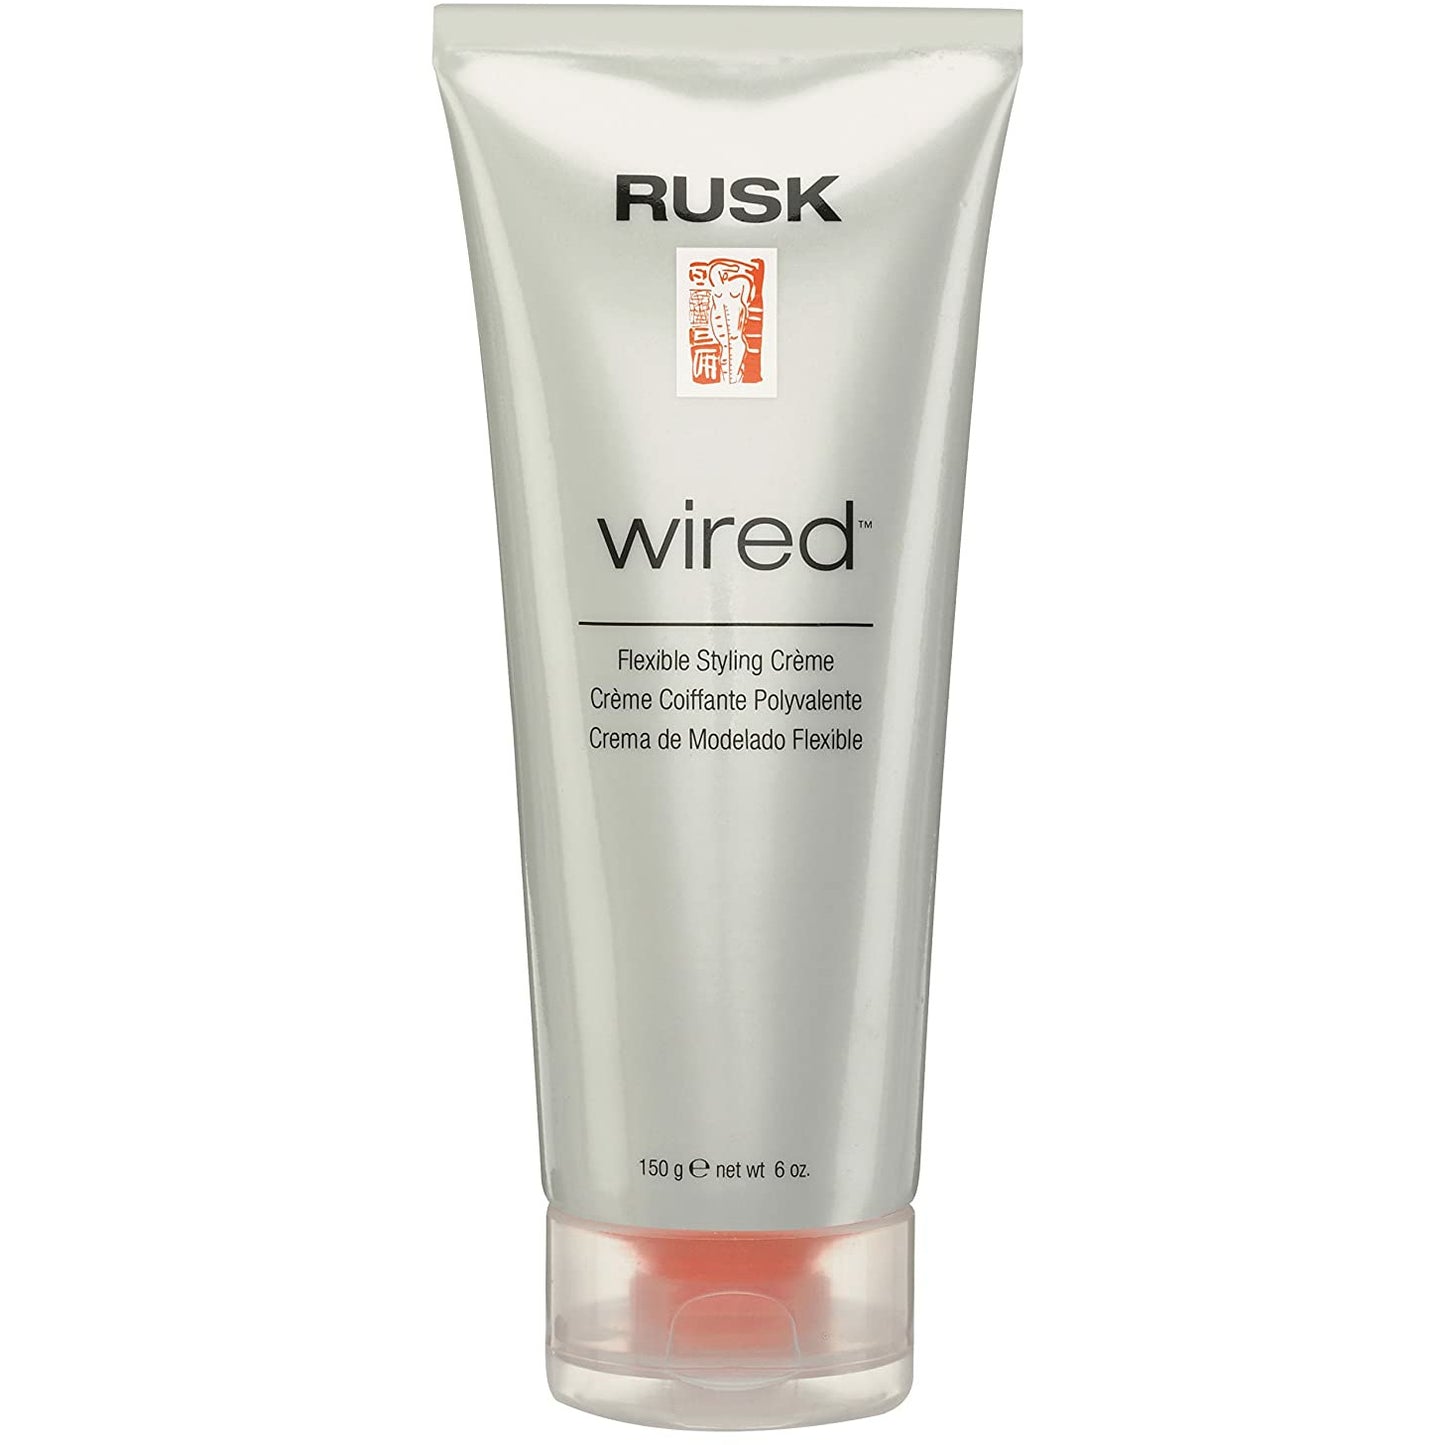 RUSK Designer Collection Wired Flexible Styling Creme